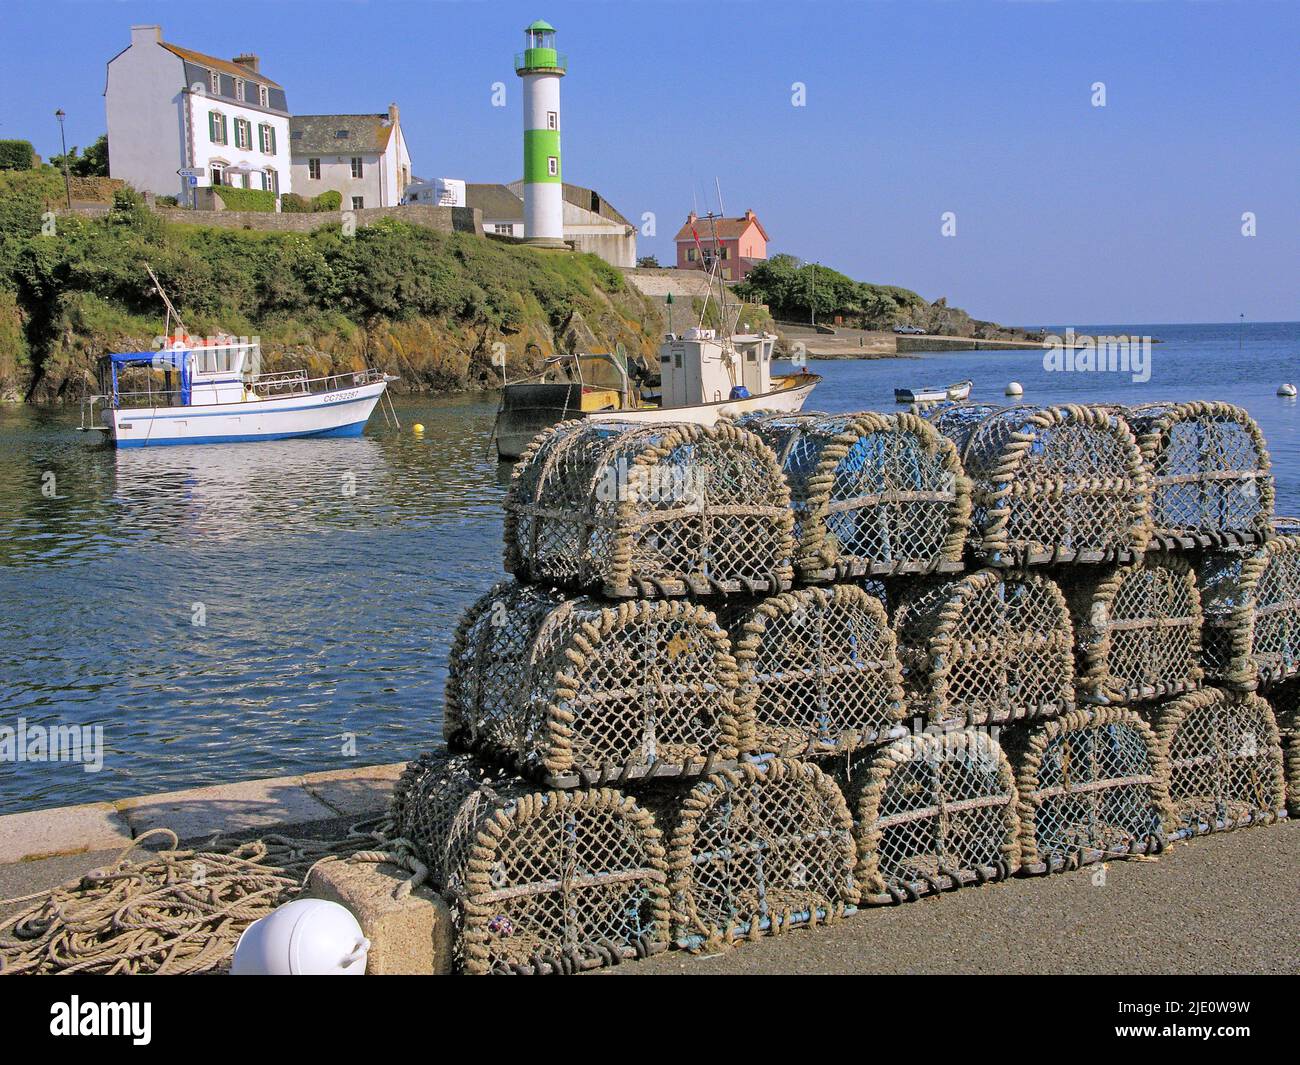 France, Finistère Clohars-Carnoët, Doëlan, entrance to the fishing port with the lighthouse and crayfish pots Stock Photo